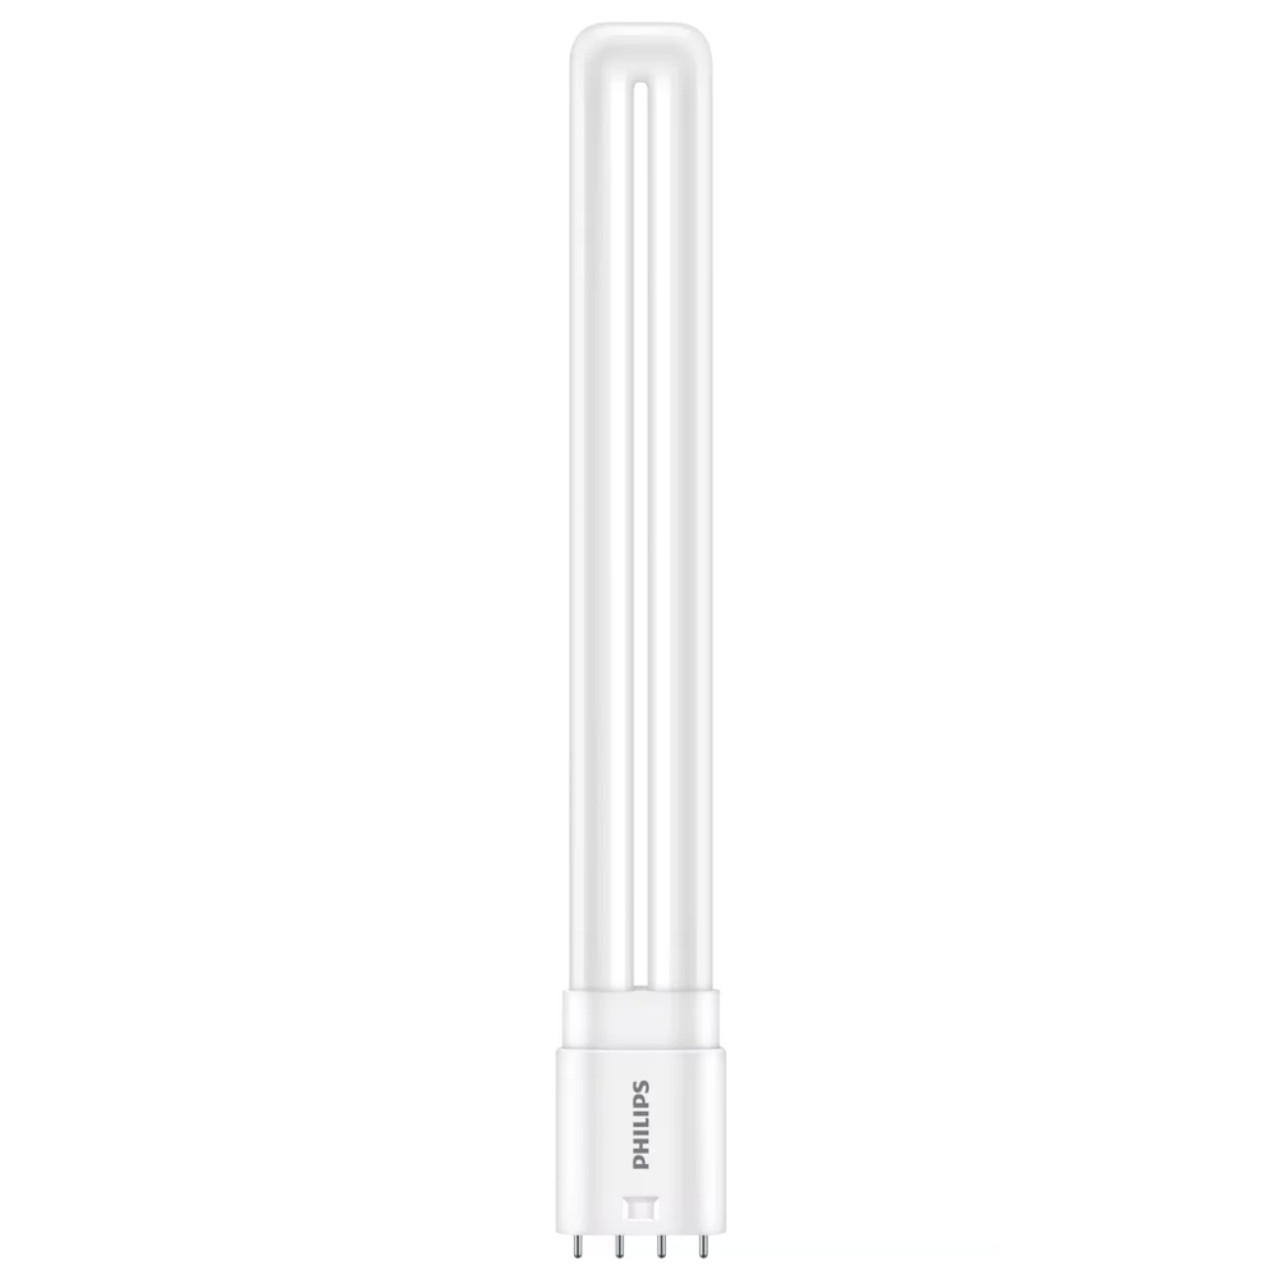 CorePro LED PLL 12W (24W eqv.) 830 4P 2G11 High Frequency Philips